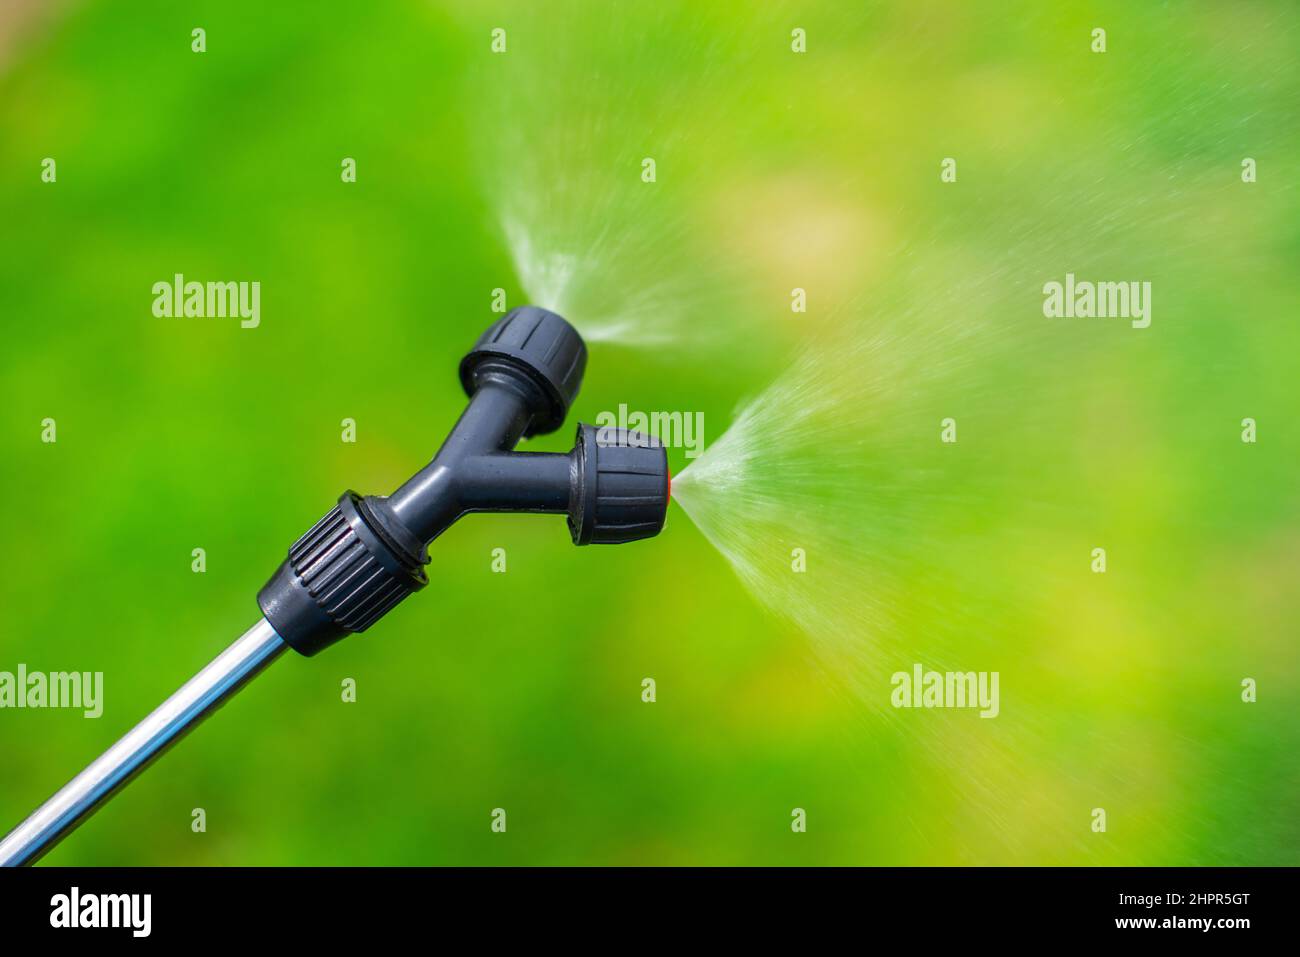 Farmer spraying vegetable green plants in the garden with herbicides, pesticides or insecticides. Stock Photo